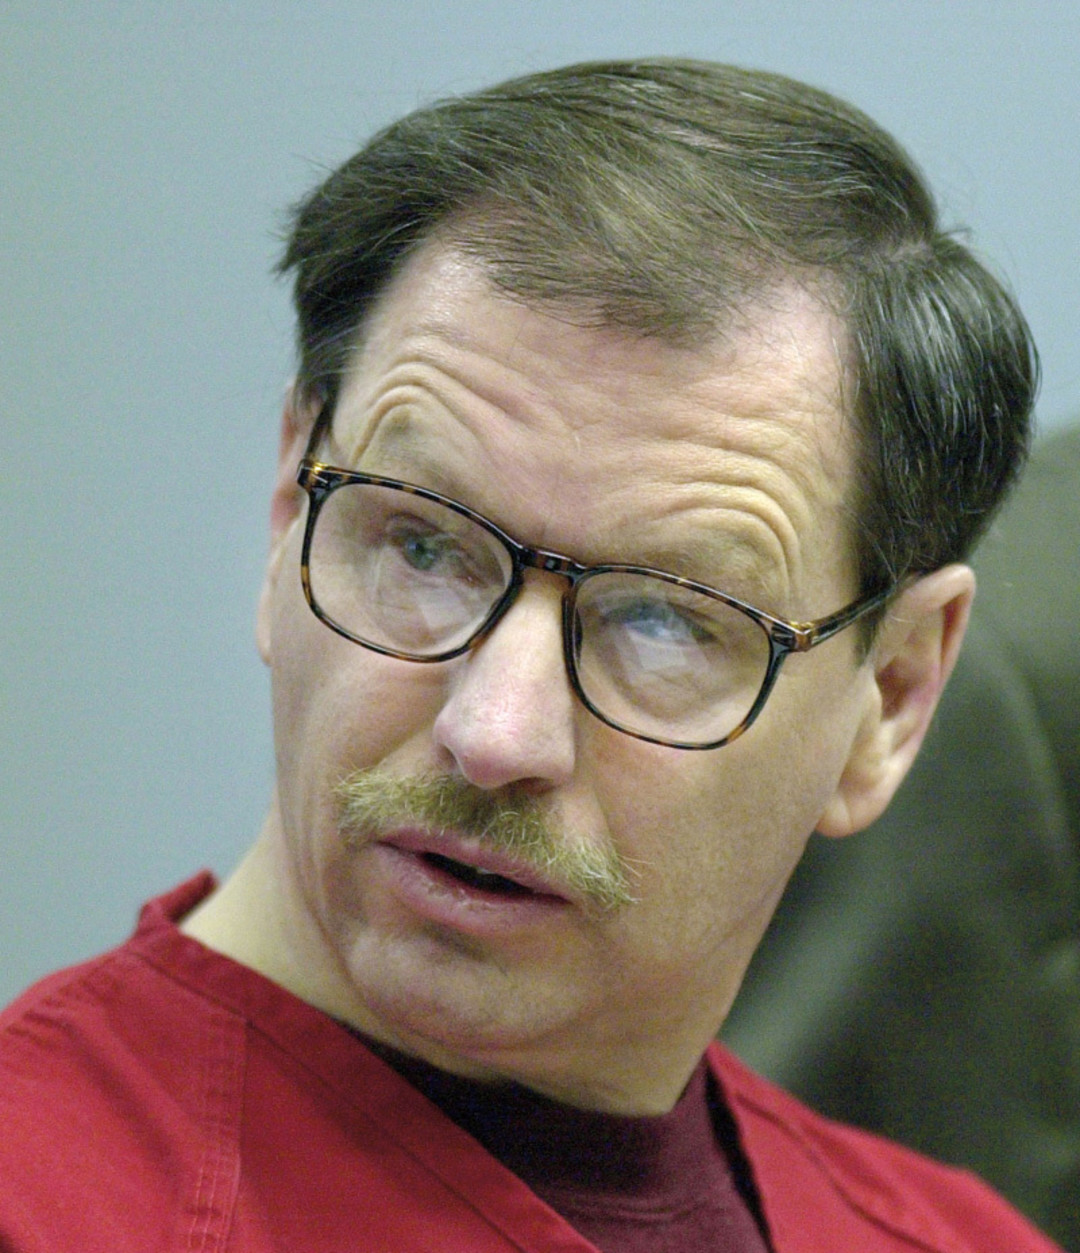 pictures of serial killers from wa state